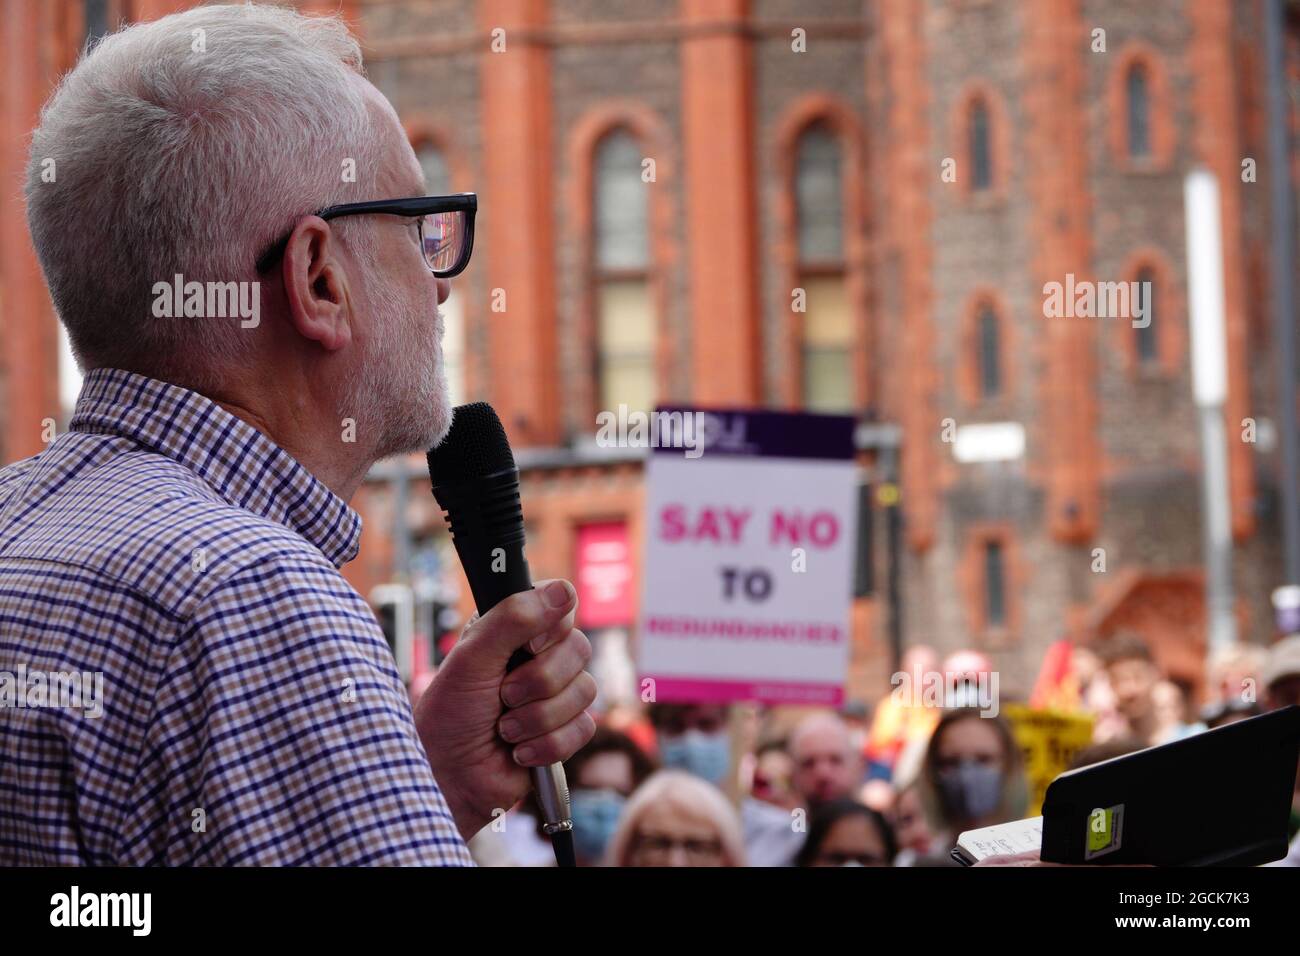 Liverpool, UK. 9th Aug, 2021. Jeremy Corbyn speaks to members of the University and College Union (UCU) at a rally at University Square to defend jobs in Liverpool University health and life sciences that remain under threat, after concerted collective action saved a large proportion of the positions targeted for redundancy by the university's administration. UCU has been involved in industrial action for months, after an overwhelming vote among UCU members across the university in favour of strike action, to defend 47 staff. Credit: ken biggs/Alamy Live News Stock Photo